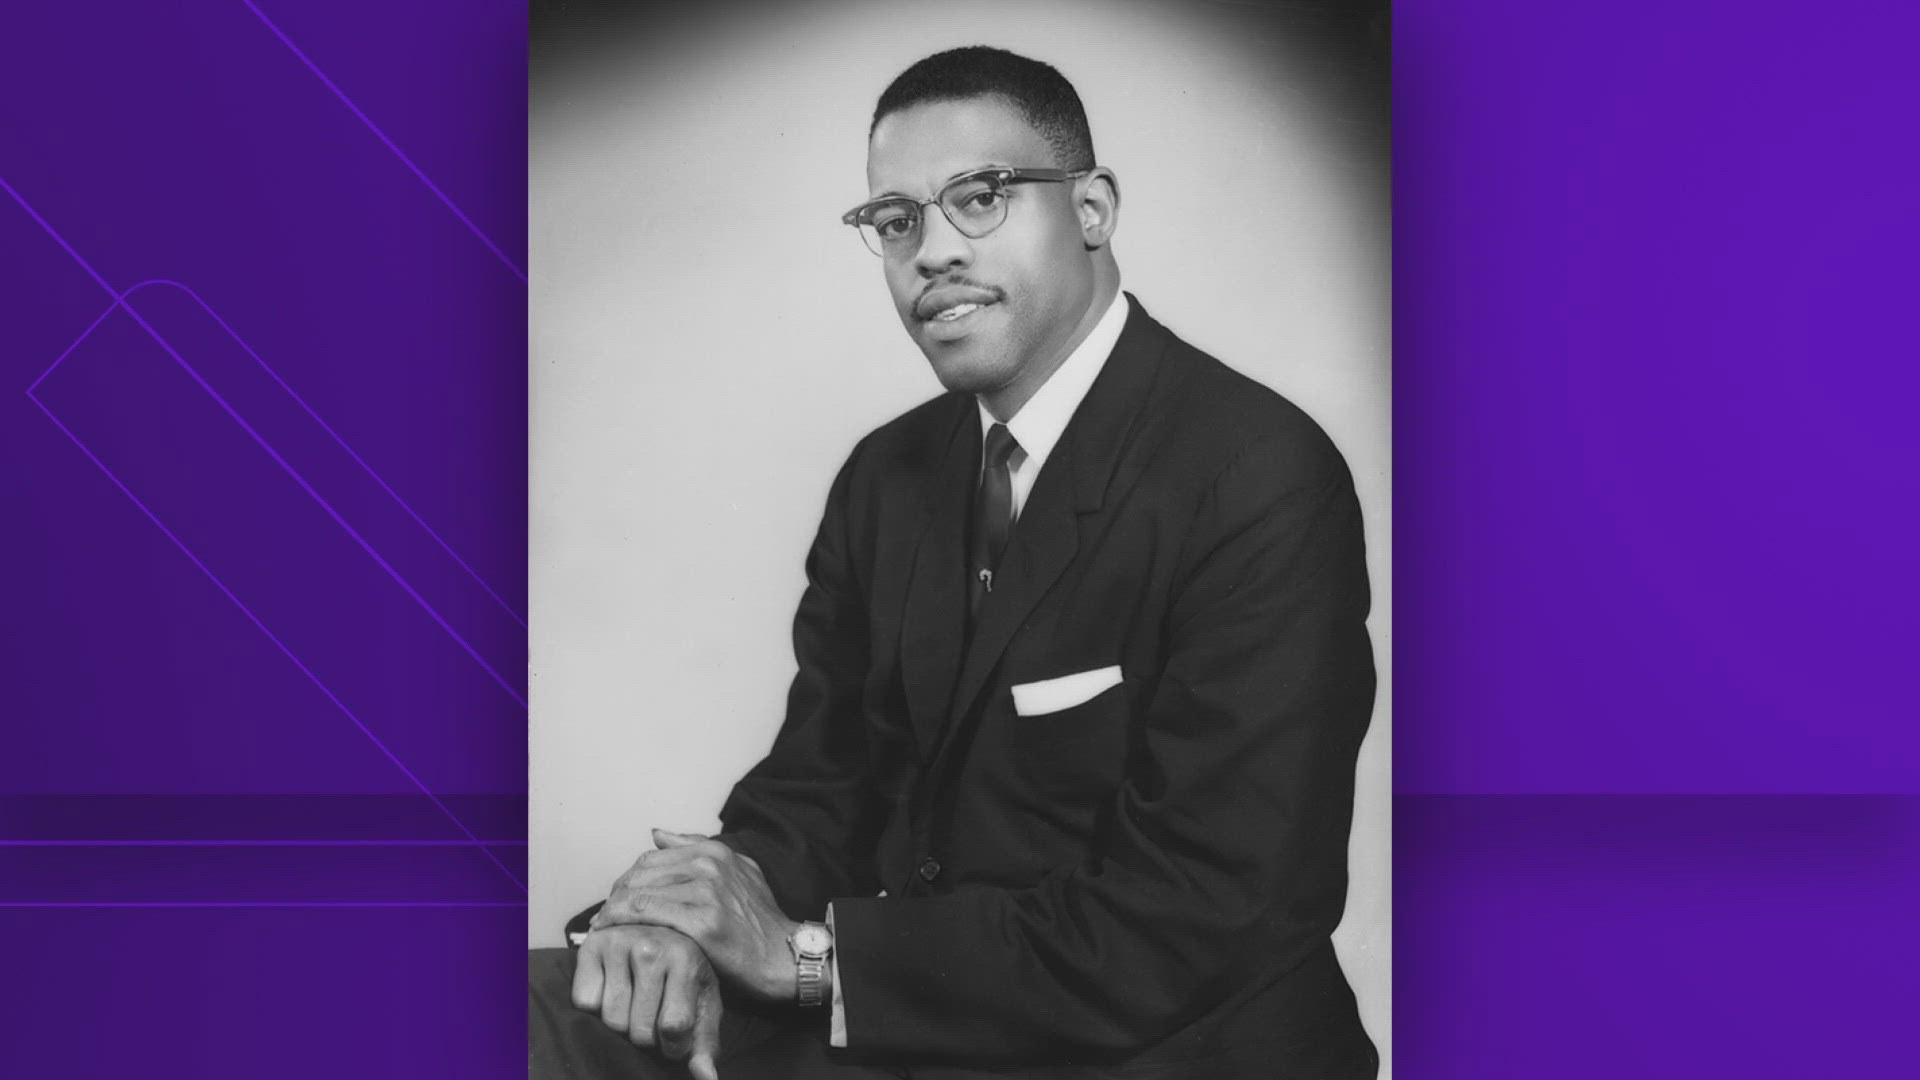 Plans to honor the civil rights leader with a street sign were never finalized.